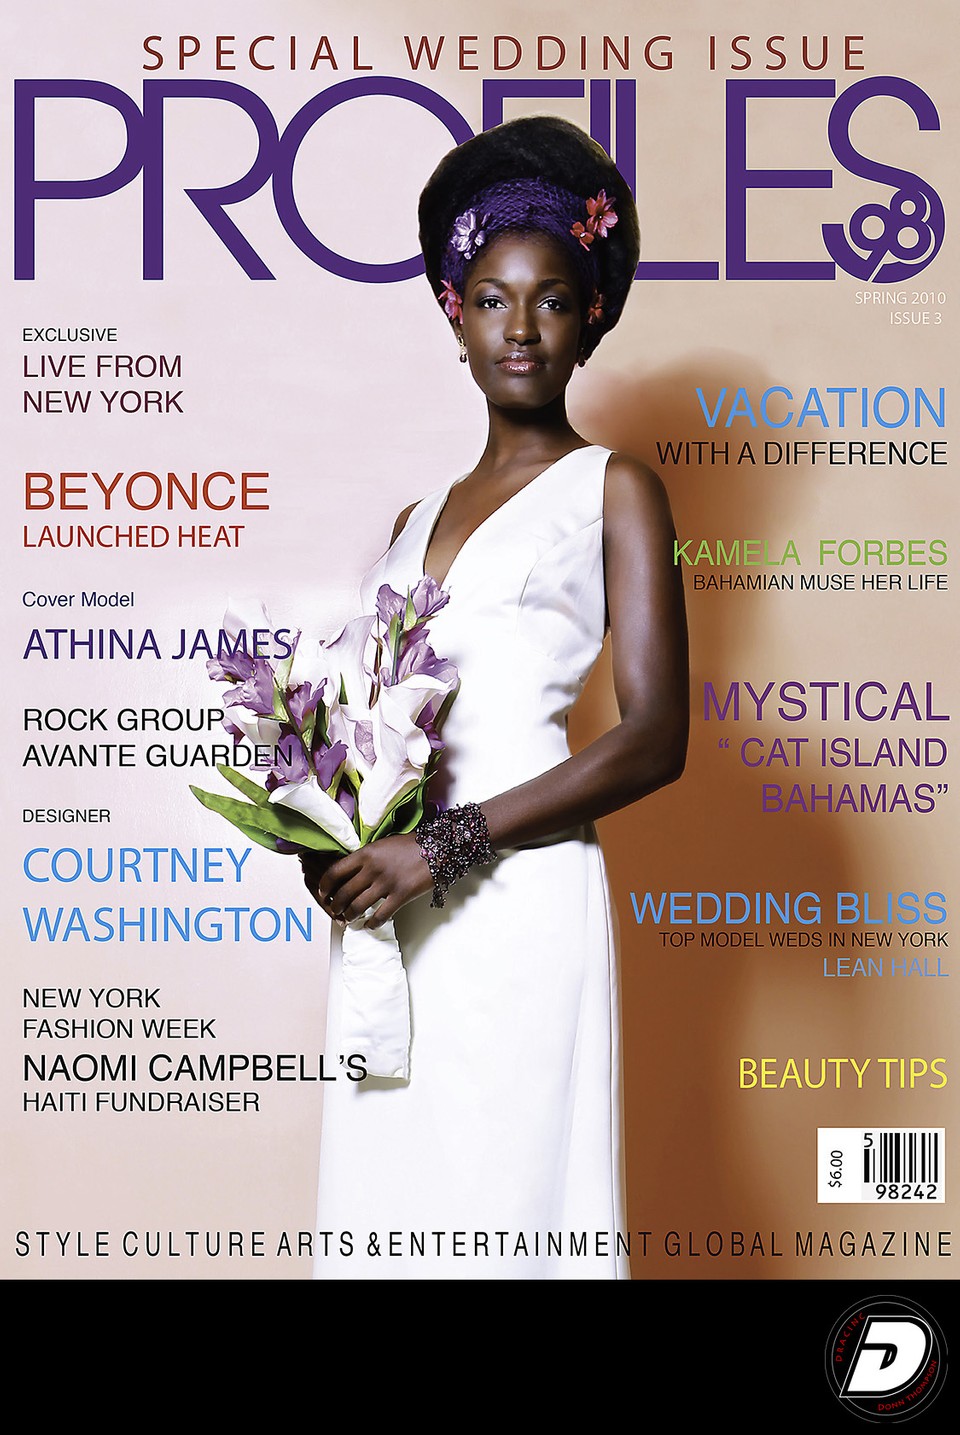 Harlem Photographer Mag Cover Profiles98 Spring 2010 